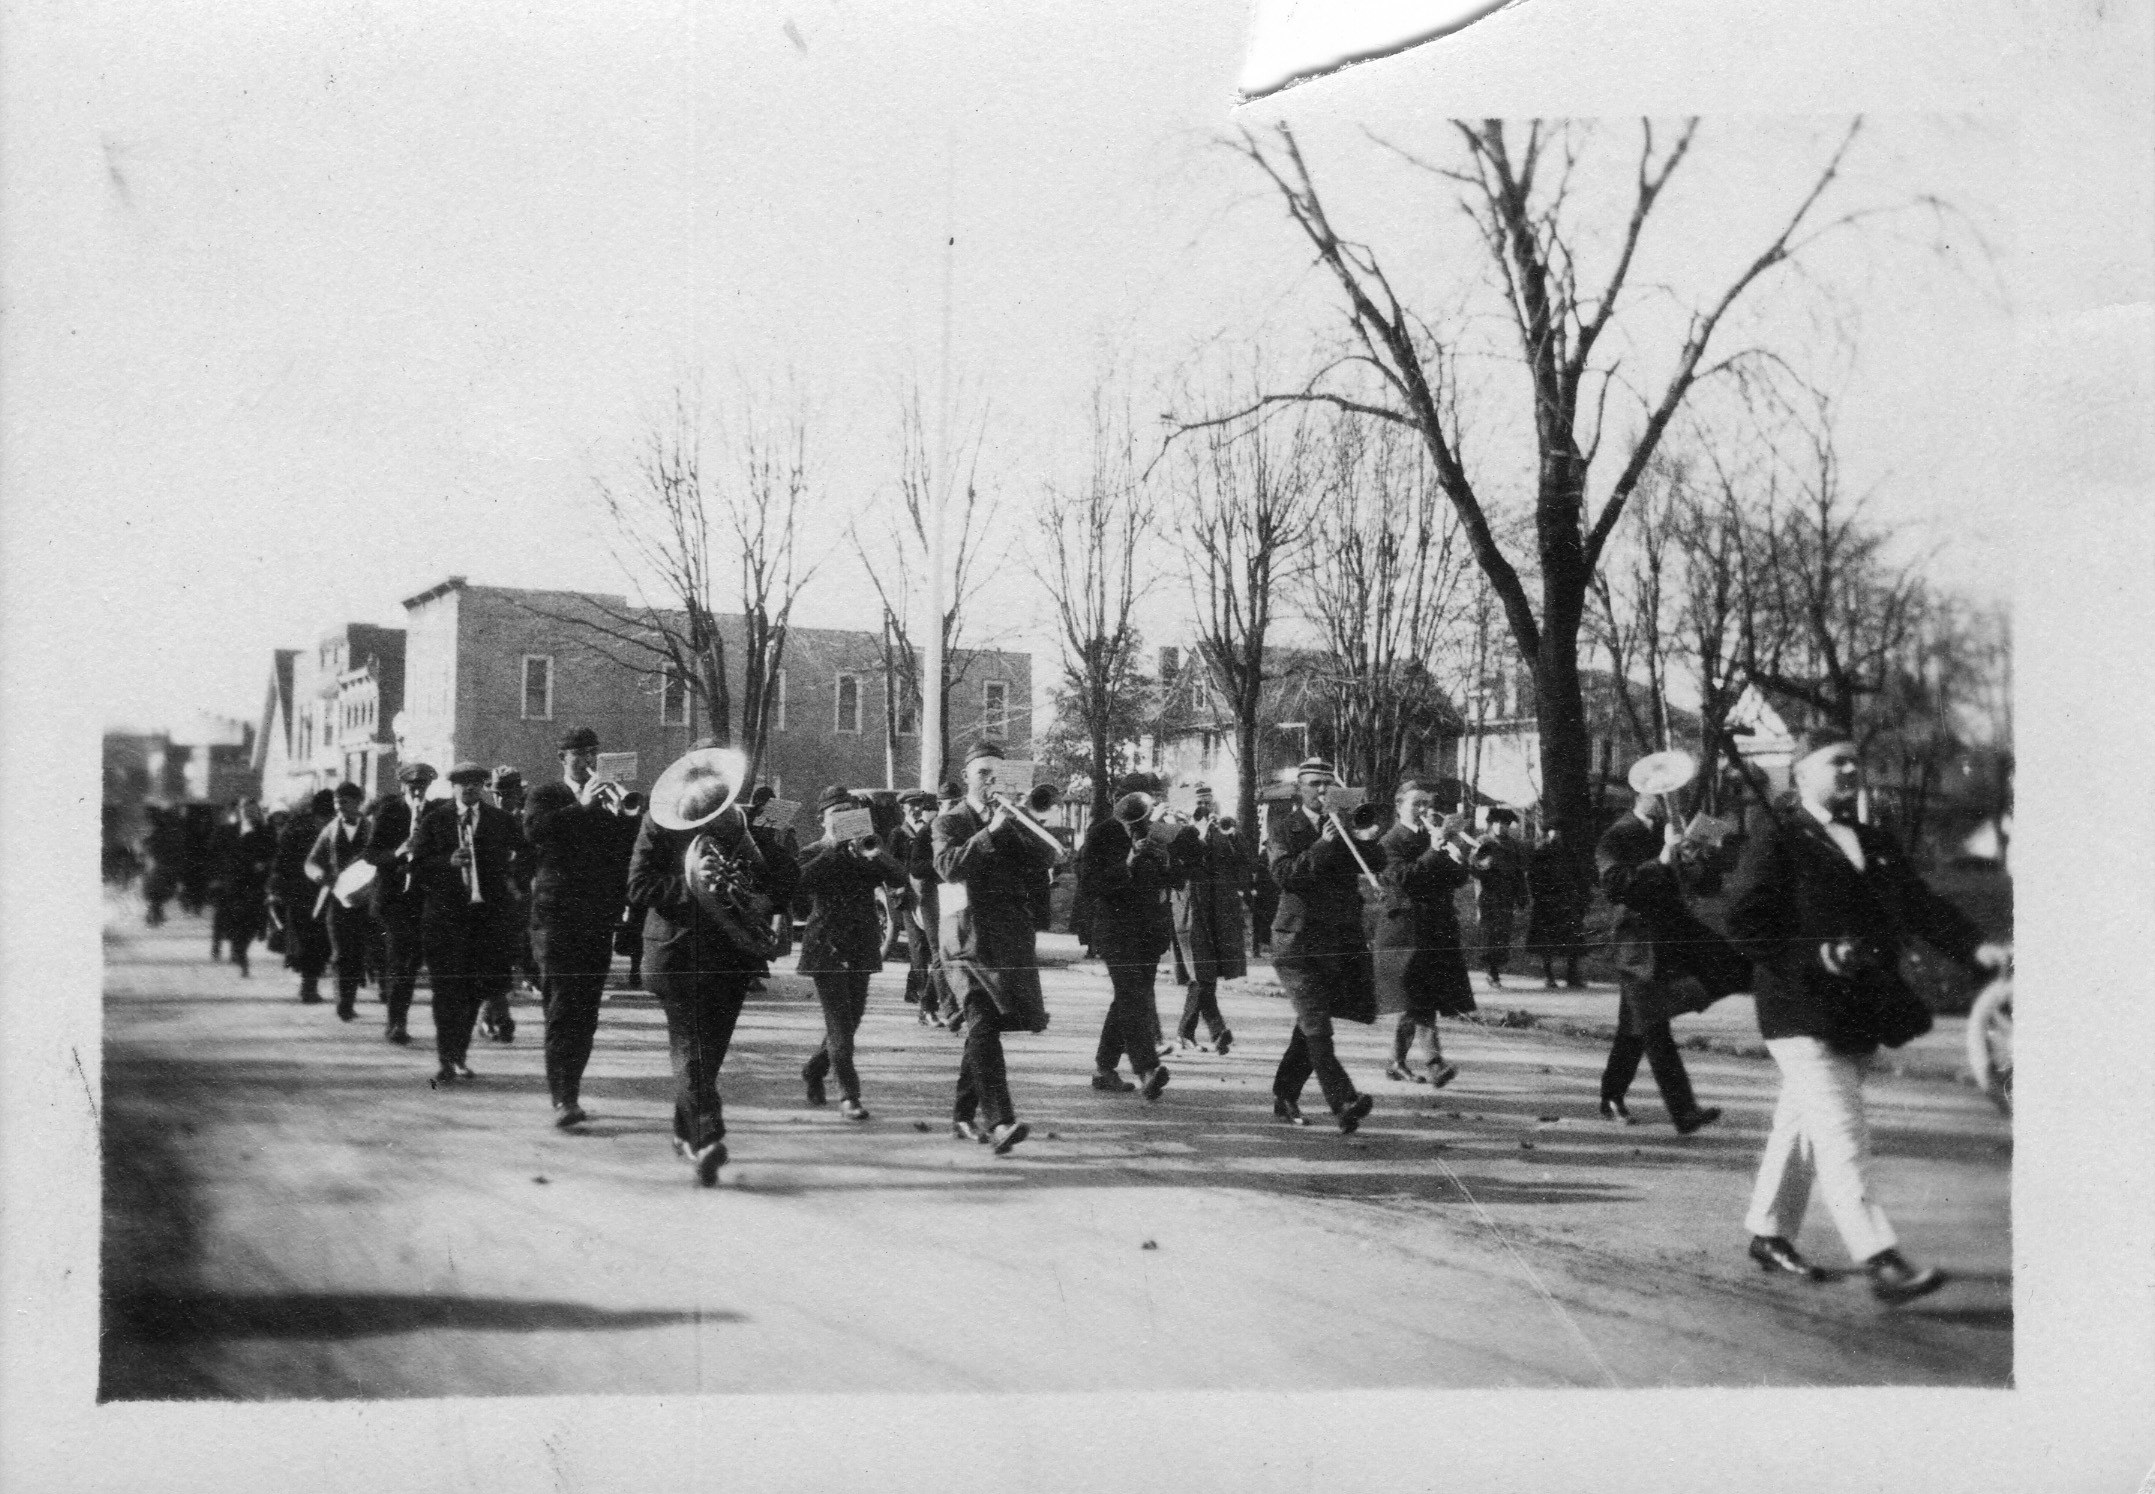 Historic photo of a marching band traveling down a street in Bowling Green